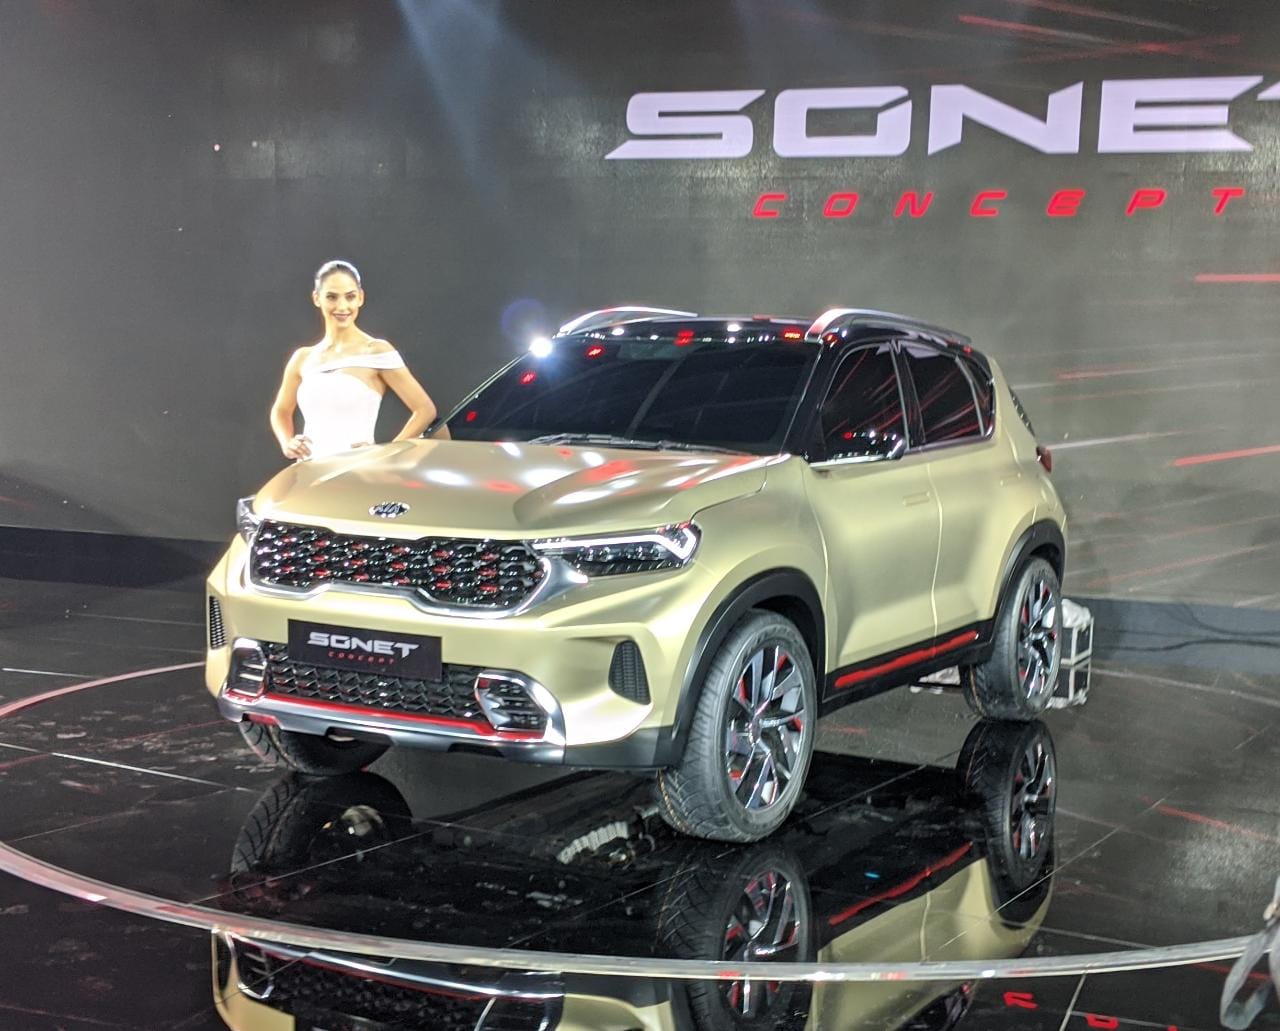 <p>Kia Sonet, an SUV that is based on the Hyundai Venue has been unveiled. If the Kia Seltos is good-looking,the Kia Sonet is even more smashing. To be launched later this year.</p>

